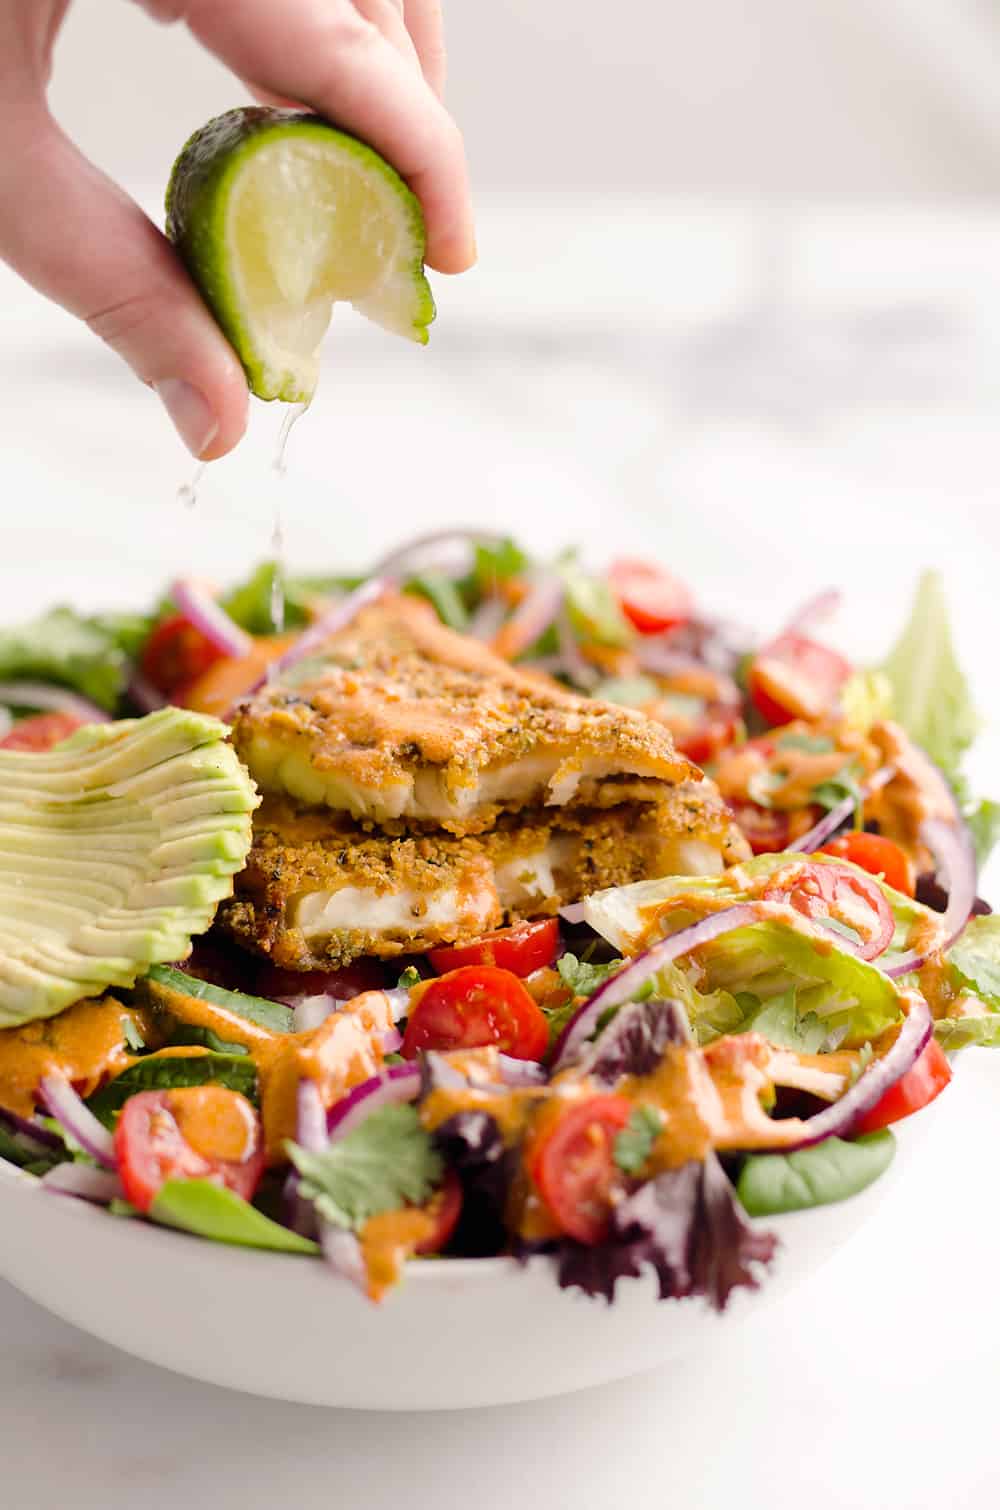 Southwest Tortilla Crusted Tilapia Salad is an easy and healthy 15 minute recipe made in your airfryer! A bed of mixed greens topped with tomatoes, avocado, red onion, Tortilla Crusted Tilapia and a homemade Chipotle Lime Dressing makes for a flavorful dinner idea you will love. 